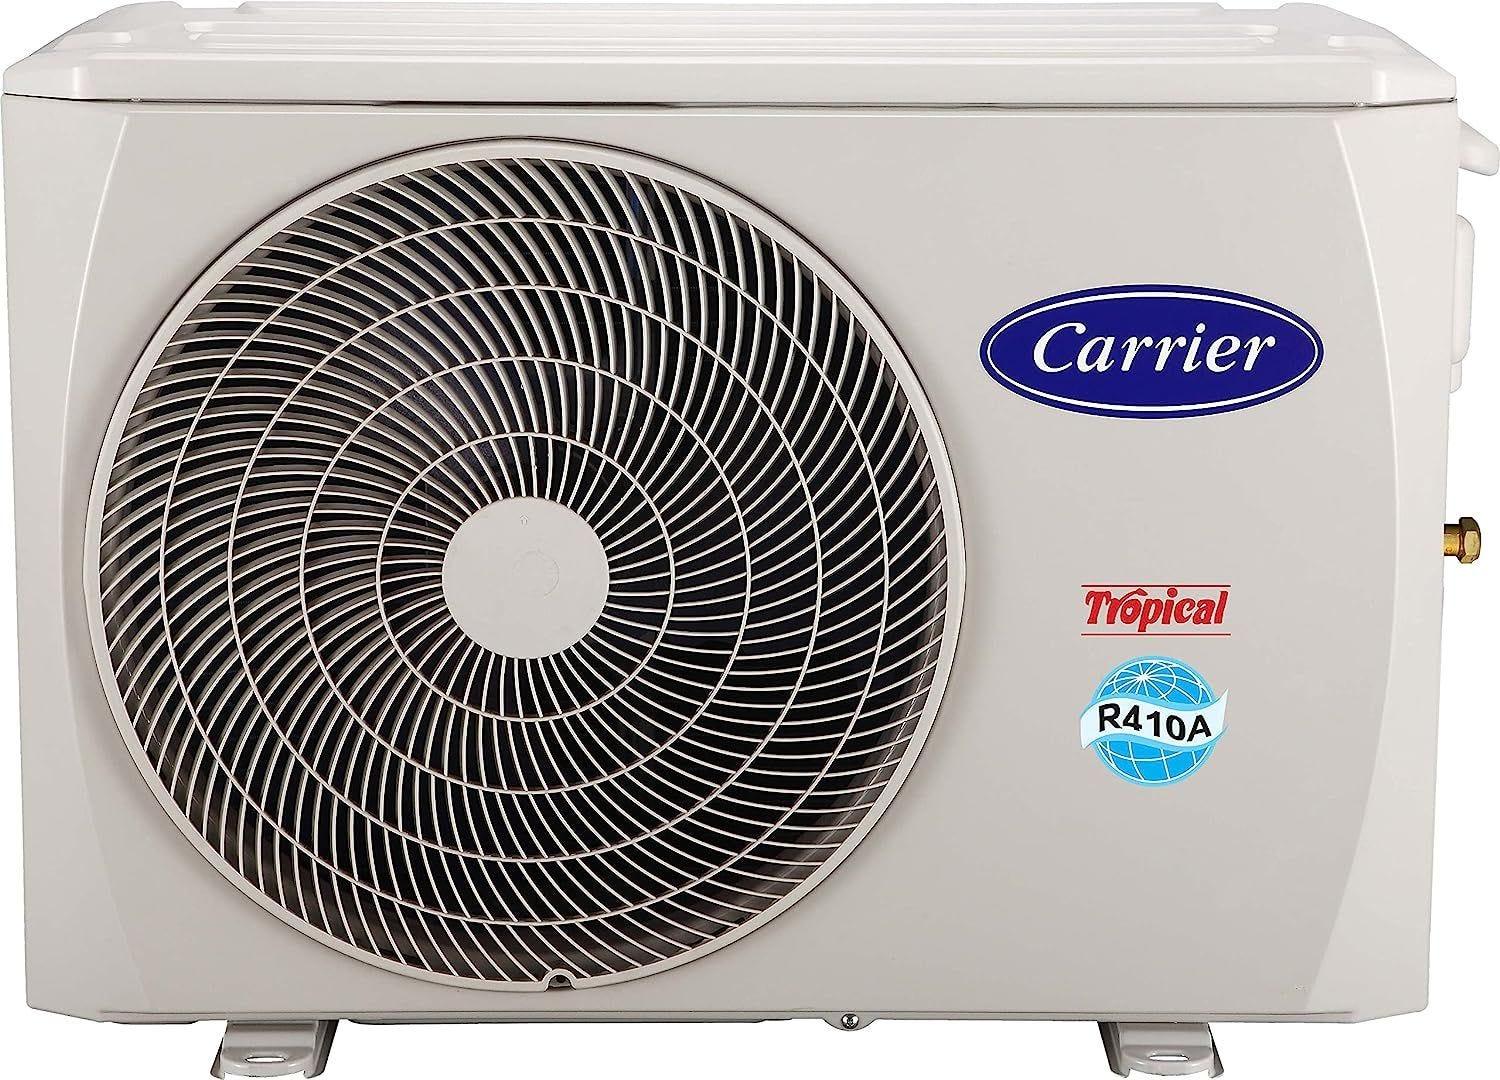 Carrier Optimax Pro Digital Split Air Conditioner With Plasma Function, 4 HP, Cooling & Heating, White - QHCT30N - EStores